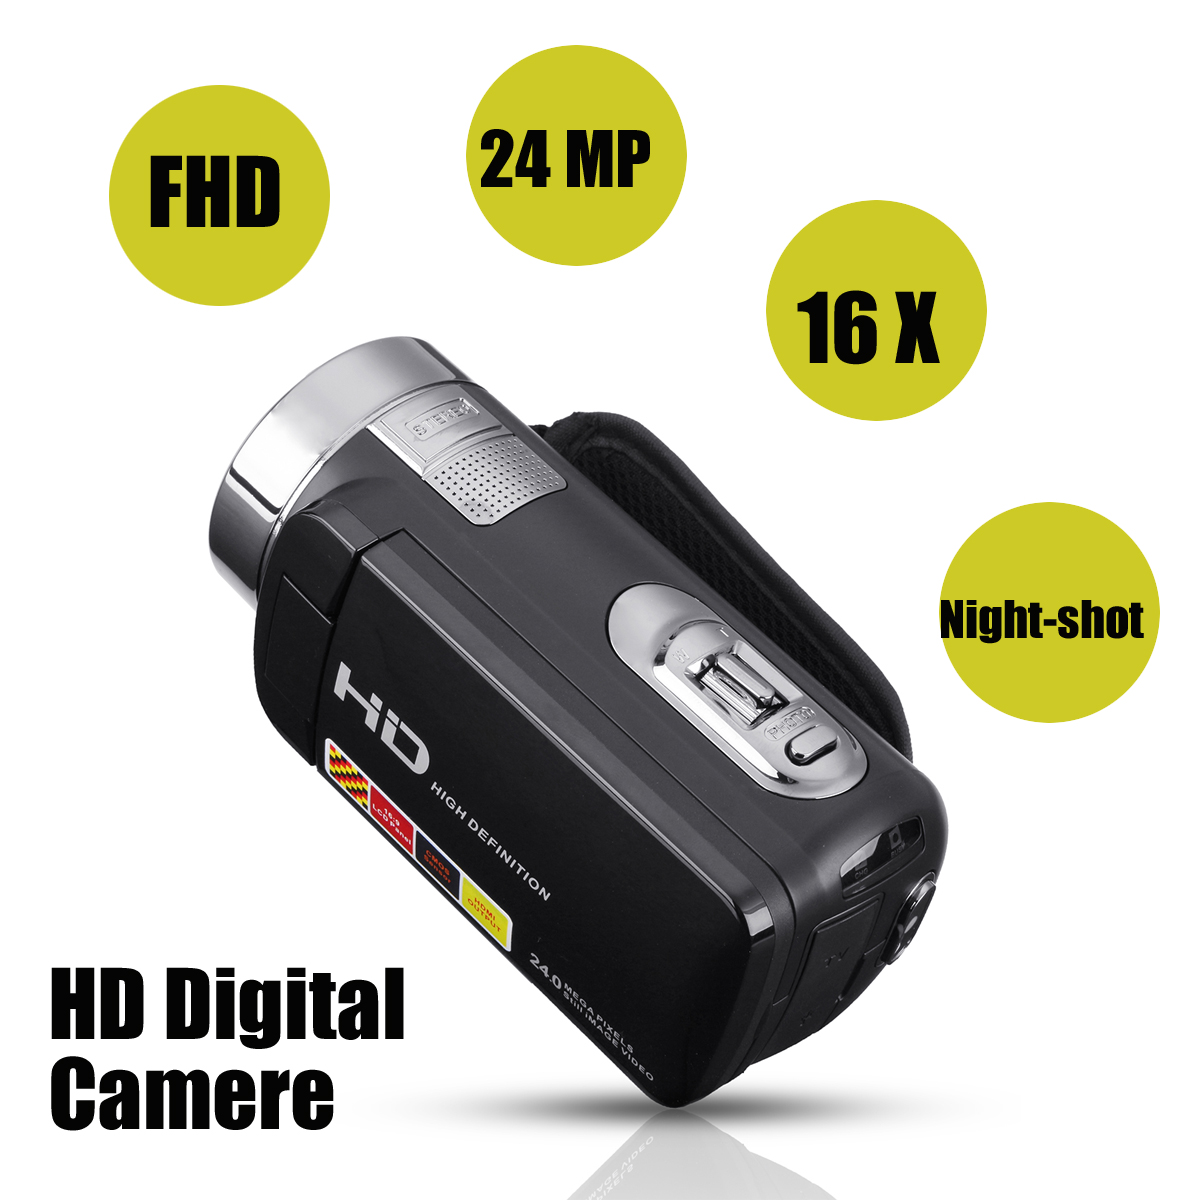 30-inch-1080P-FHD-Video-Camcorder-Night-shot-24MP-Digital-Camera-With-Remote-Control-1170037